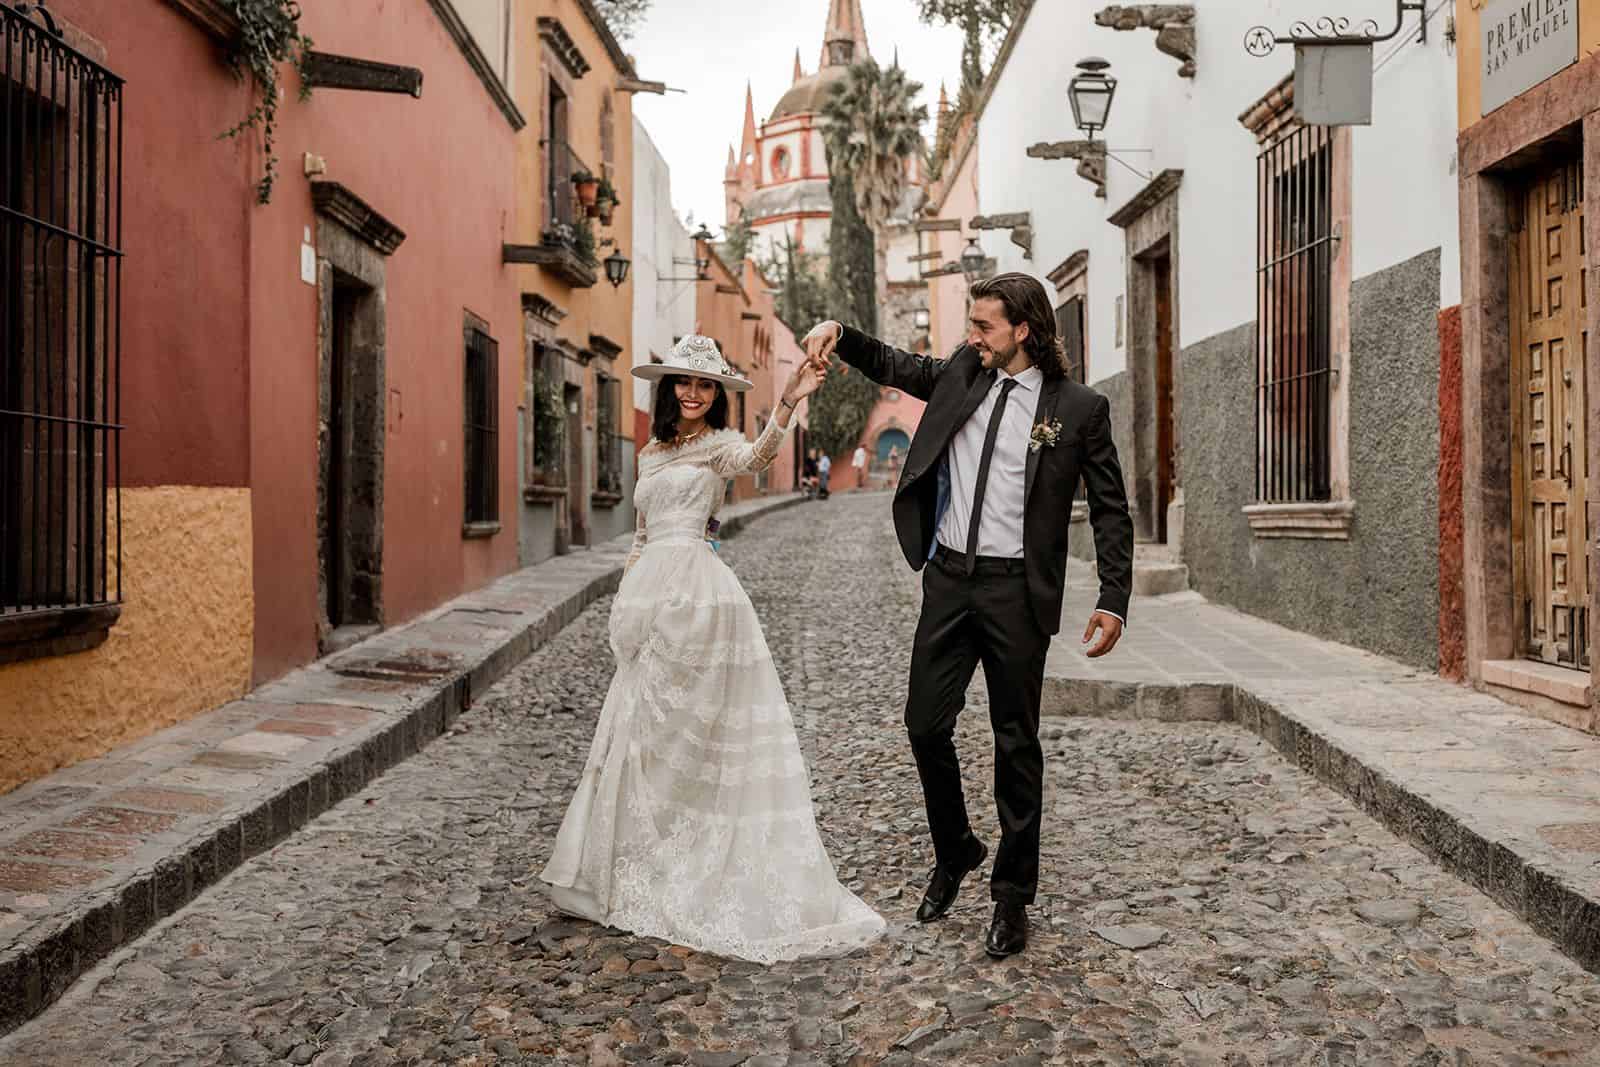 Bride and groom models dance in streets of Mexico during styled wedding shoot